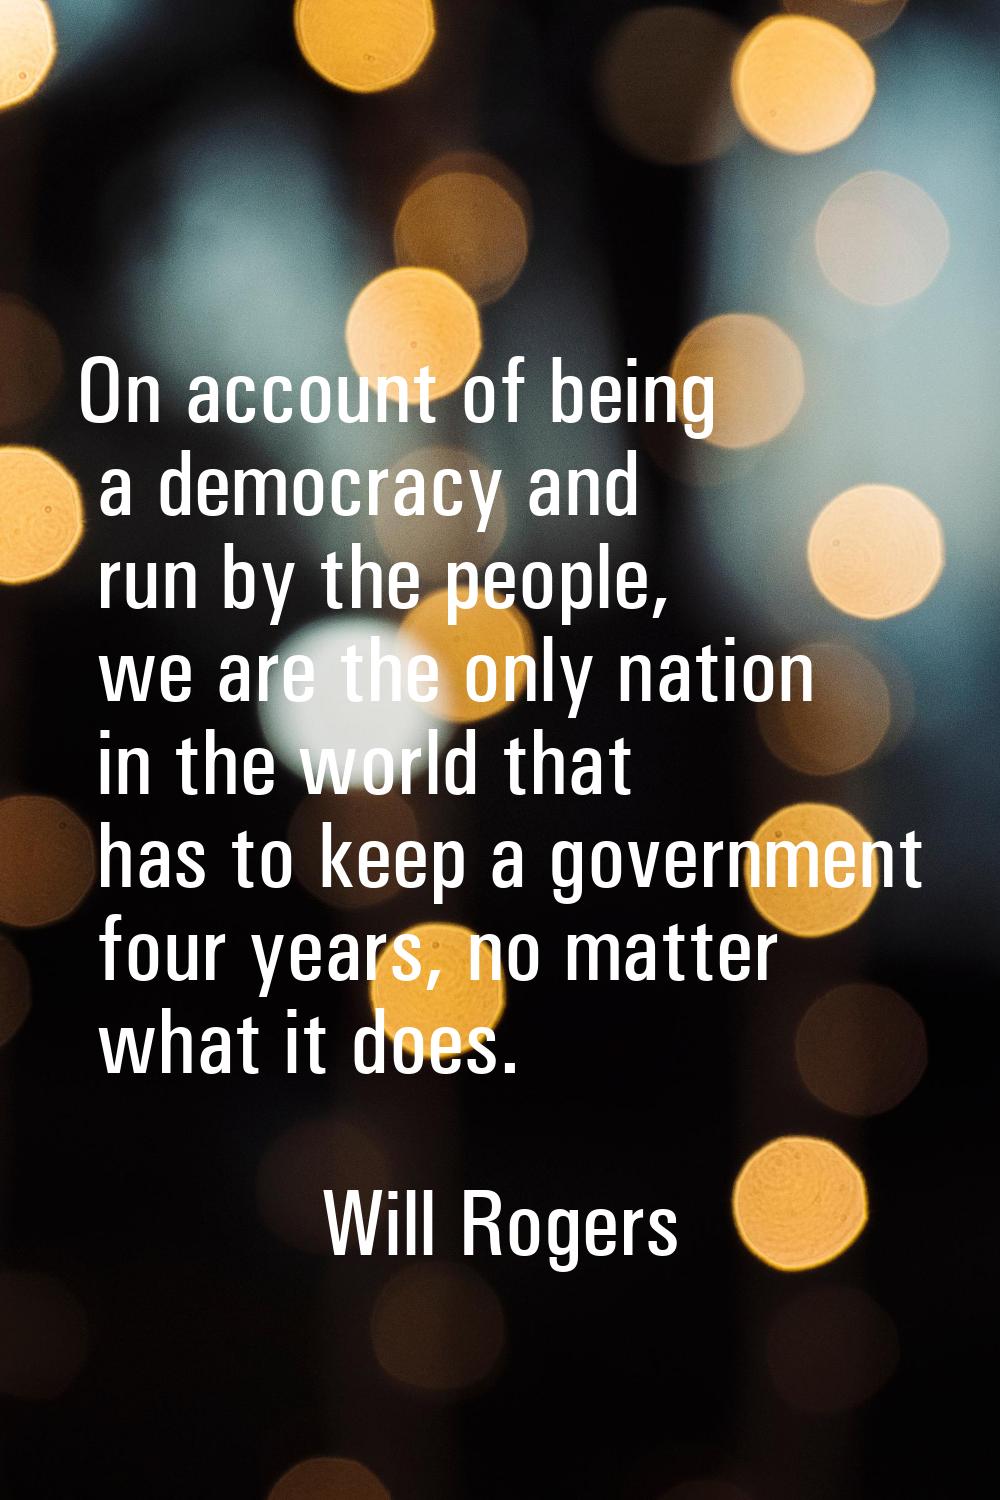 On account of being a democracy and run by the people, we are the only nation in the world that has